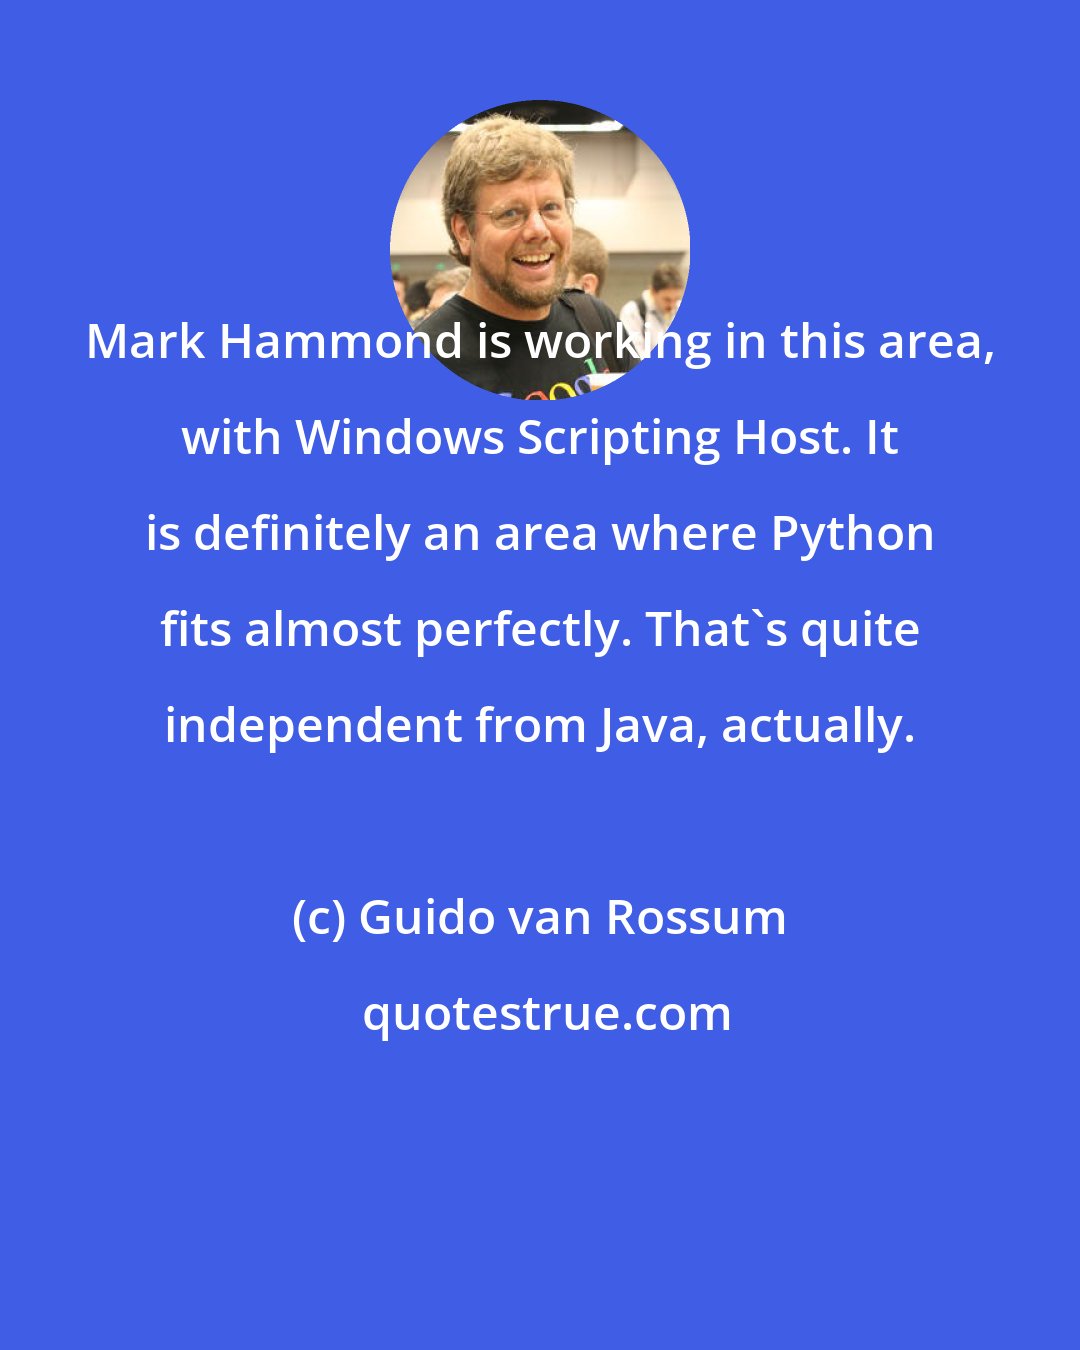 Guido van Rossum: Mark Hammond is working in this area, with Windows Scripting Host. It is definitely an area where Python fits almost perfectly. That's quite independent from Java, actually.